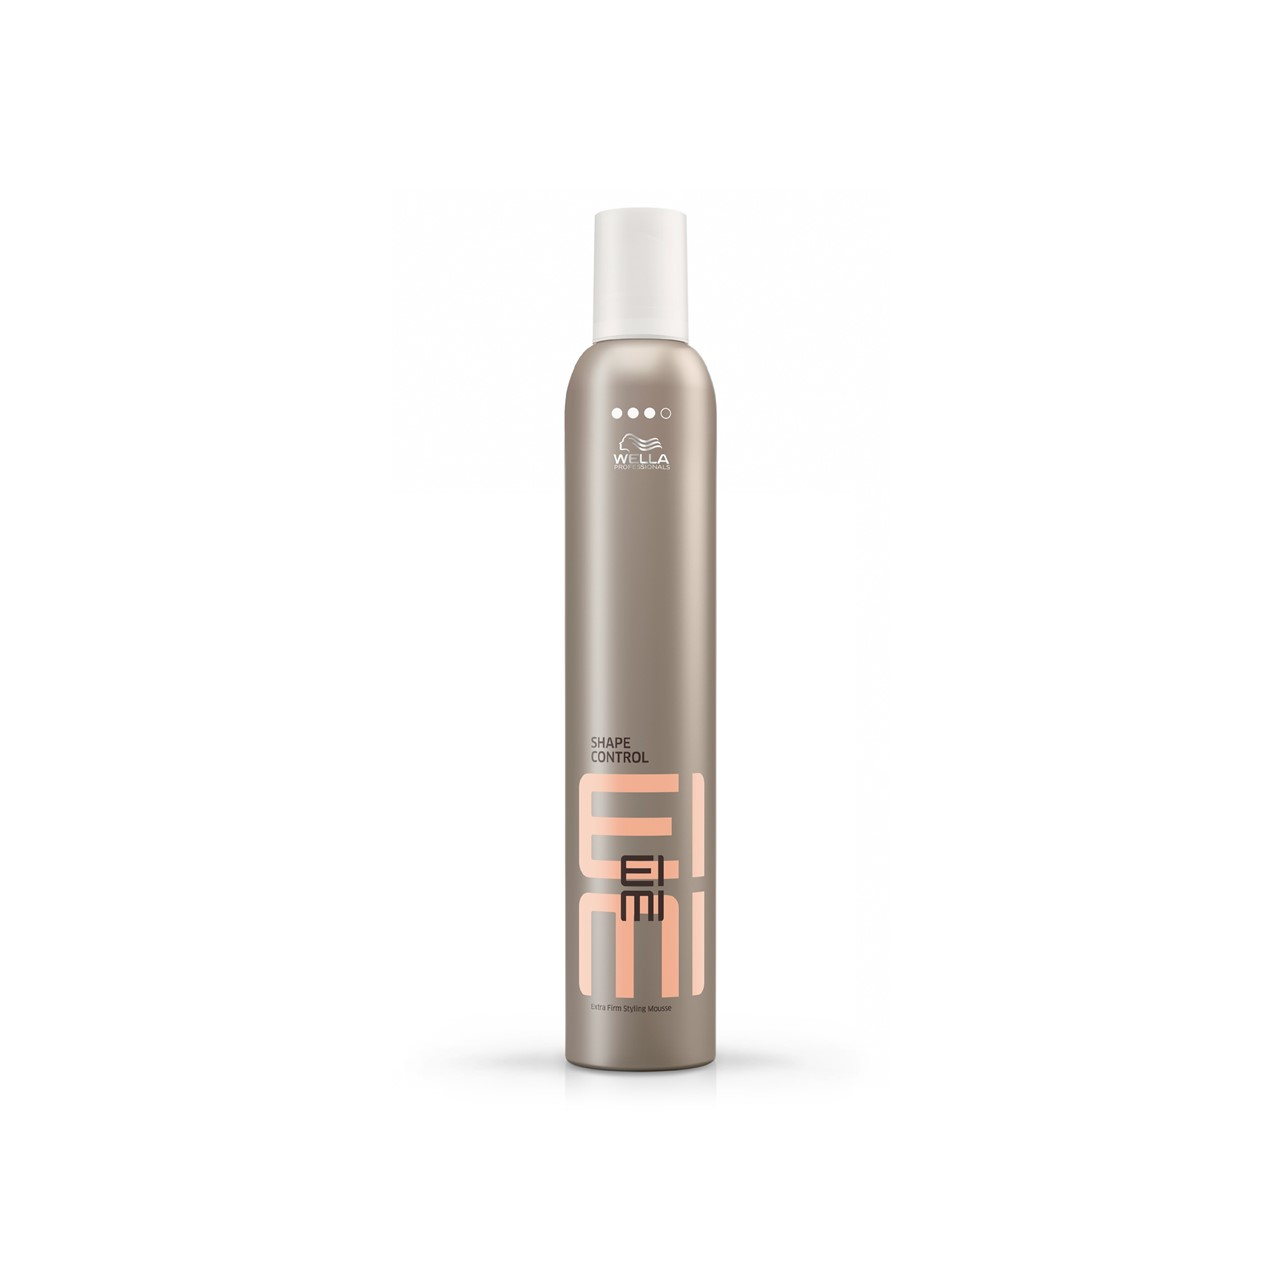 Wella EIMI Shape Control Firm Styling Mousse 300ml